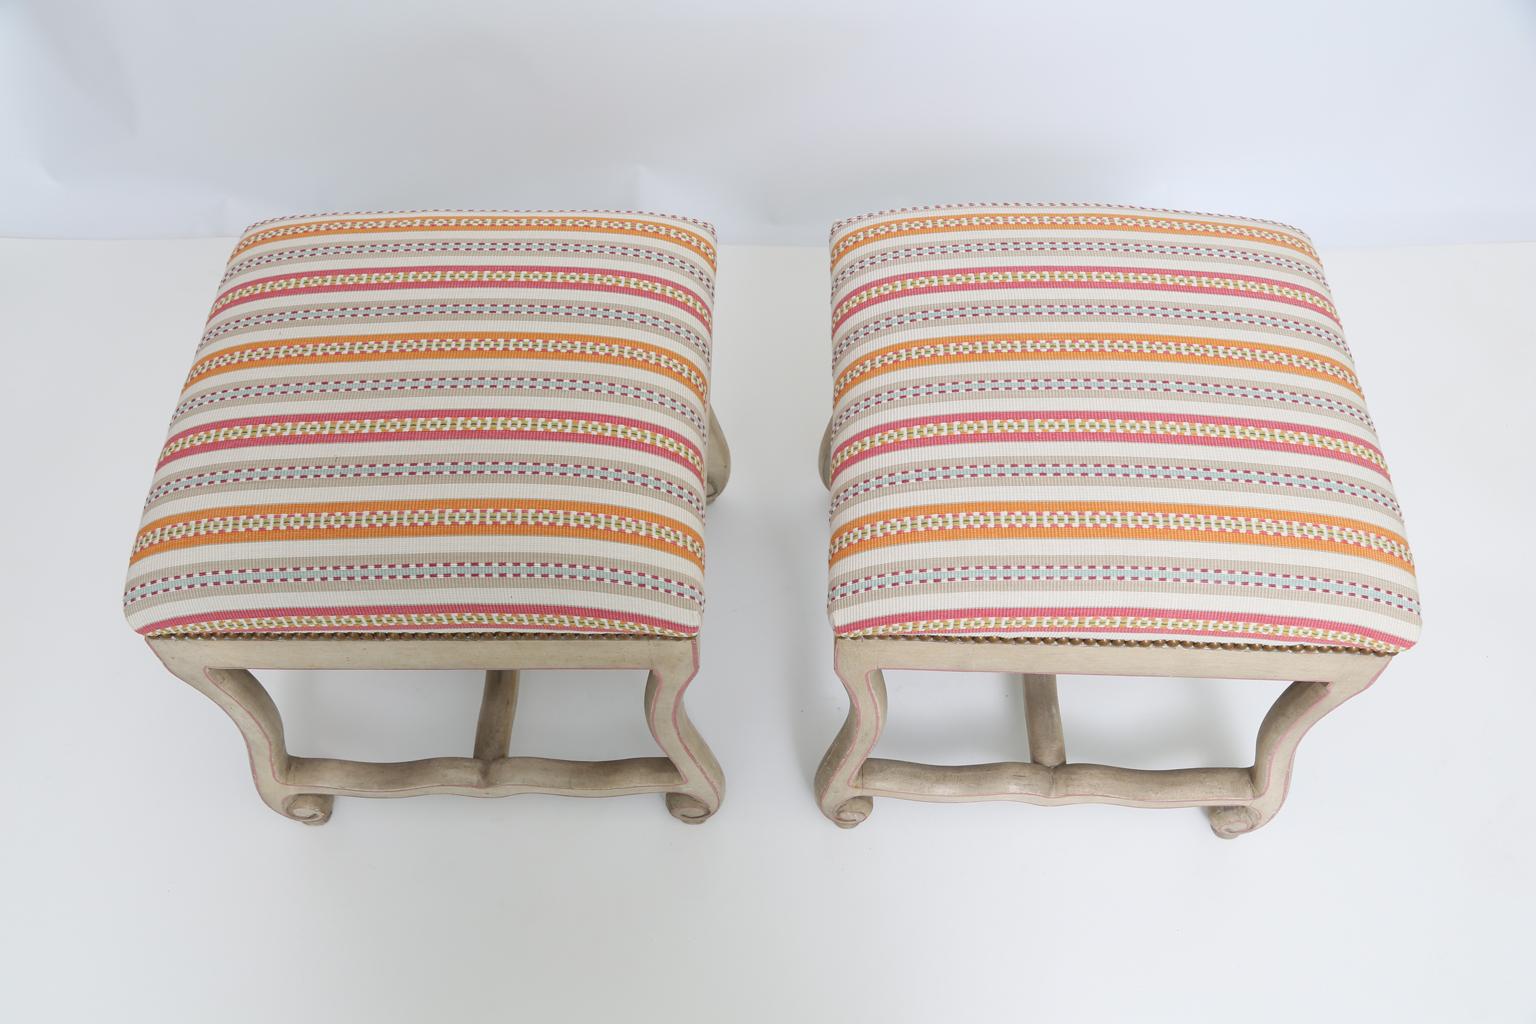 Pair of Os de Mouton stools, in the Provincial taste, having a painted finish showing natural wear, upholstered crown seats with nailheads. 

Stock ID: D2576.